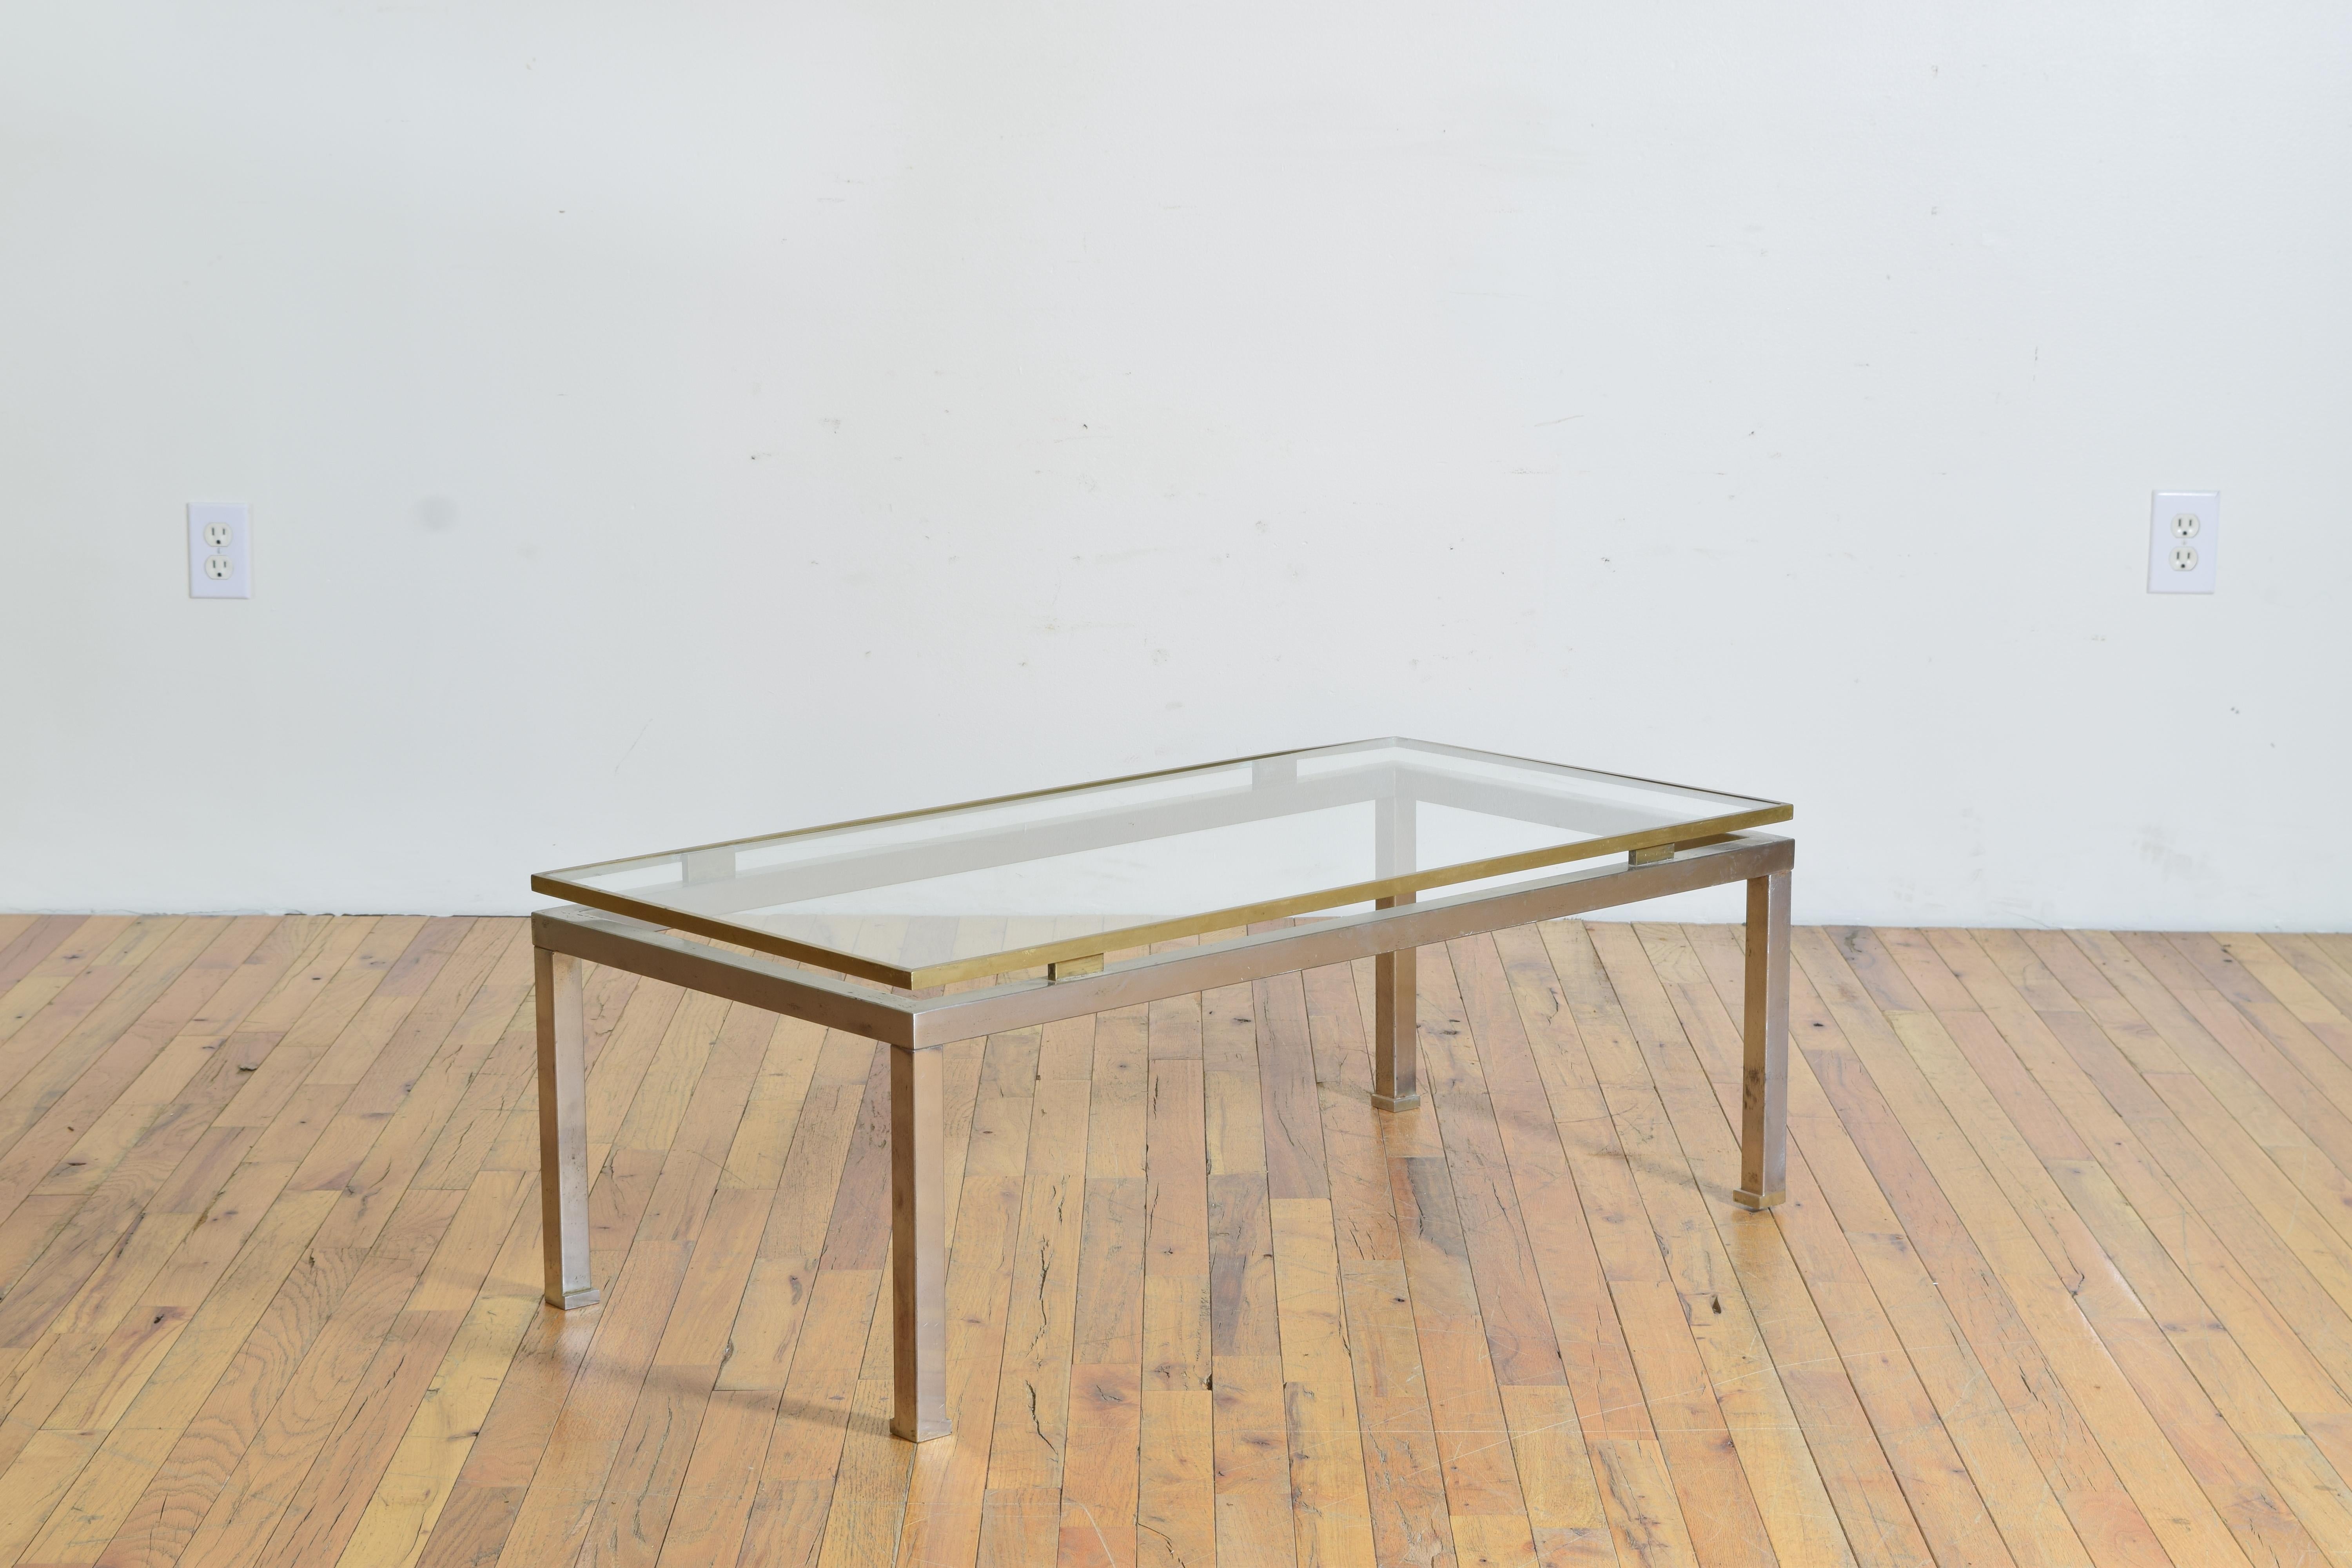 In the style of Romeo Rega, having a rectangular glass top within a brass frame “hovering” above a steel lower frame with straight legs and slightly notched feet